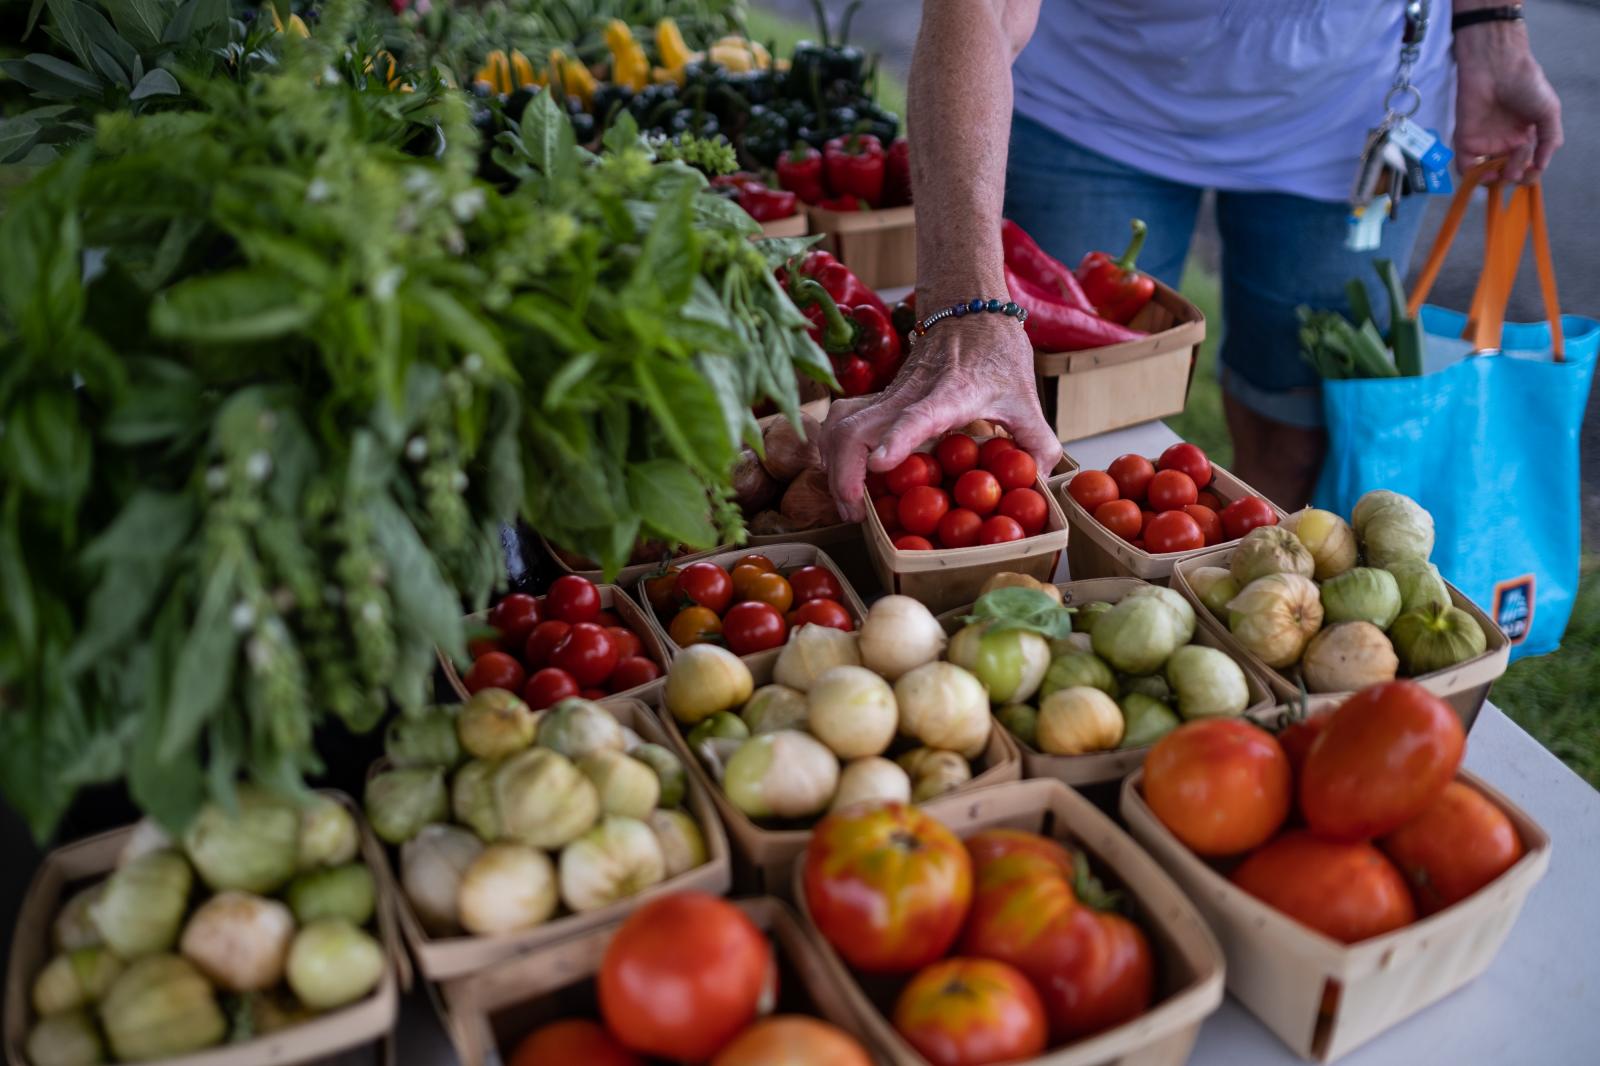 A farm stand visitor picks tomatoes to purchase.